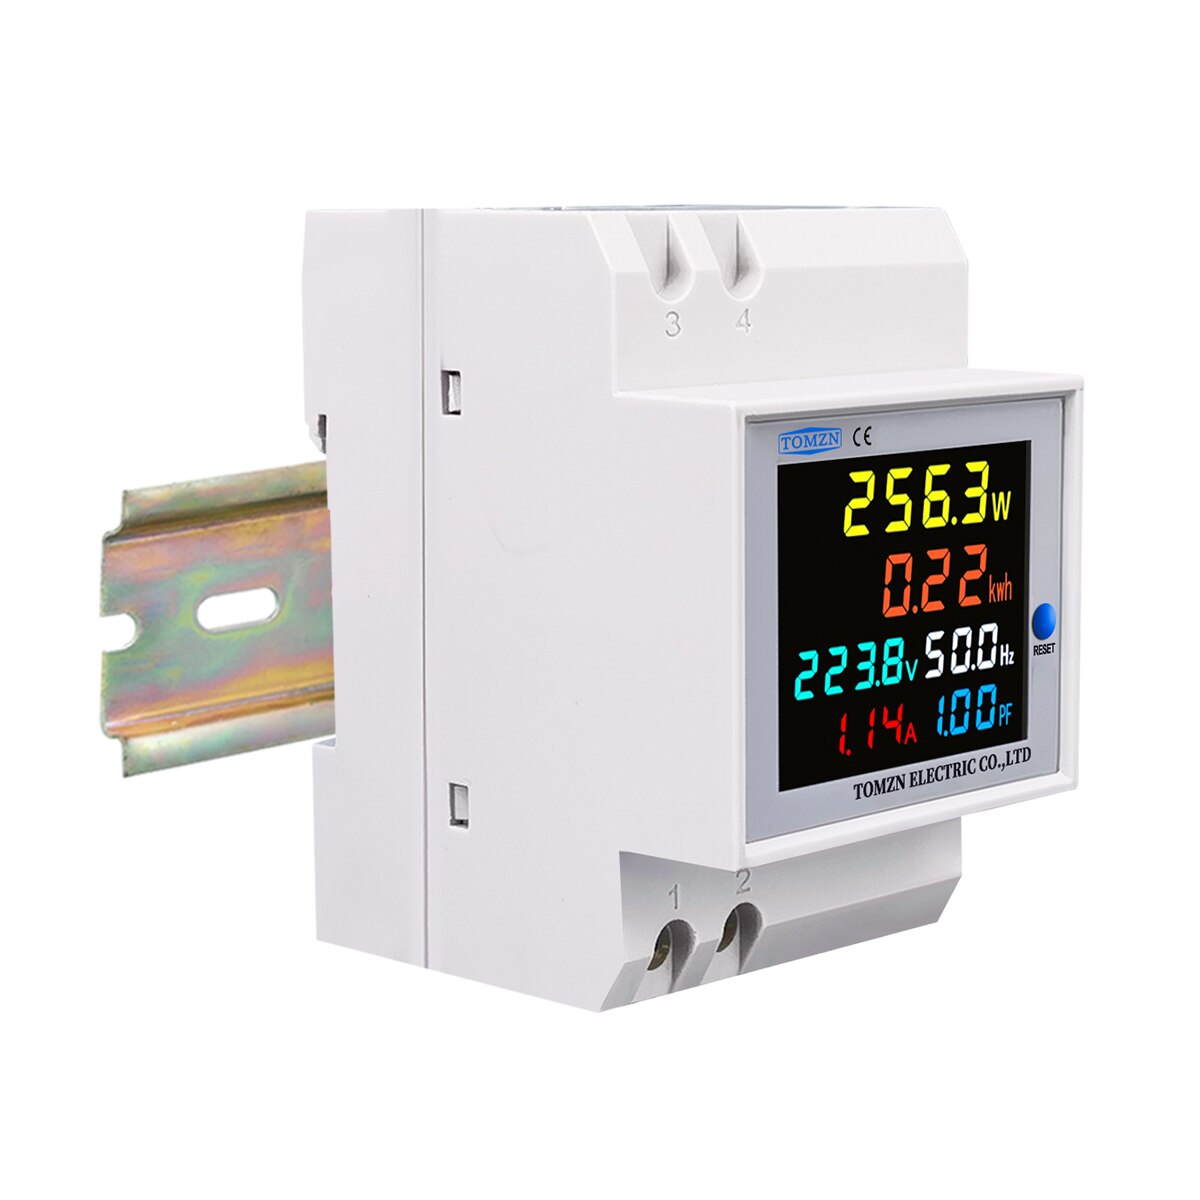 TOMZN- Din rail AC monitor 6IN1- 100A Frequency Meter| 40-300V/ 250-450V Optional.